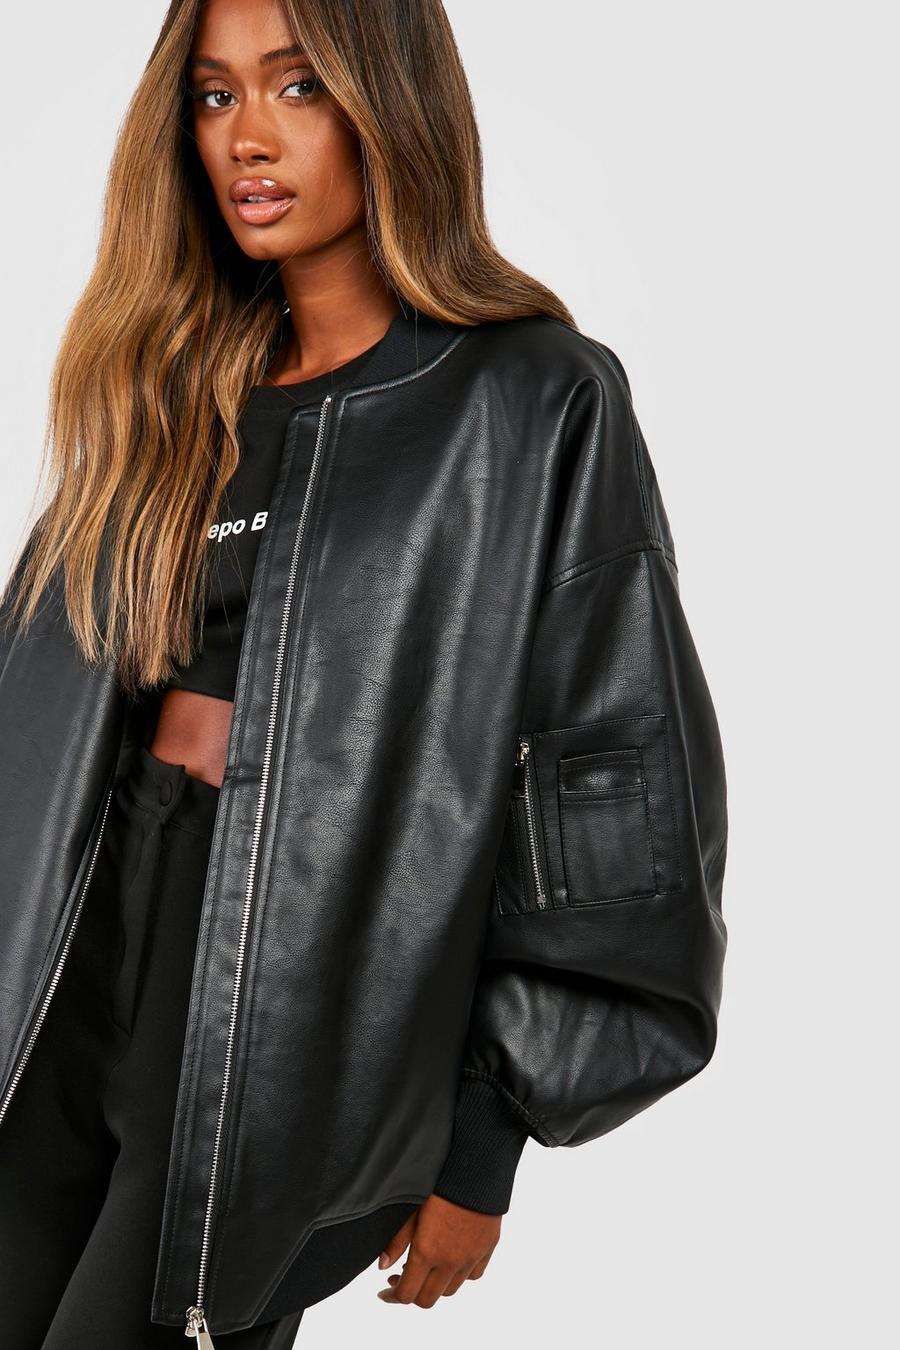 Black Bomber Jacket Womens  Hooded Leather Women In Canada